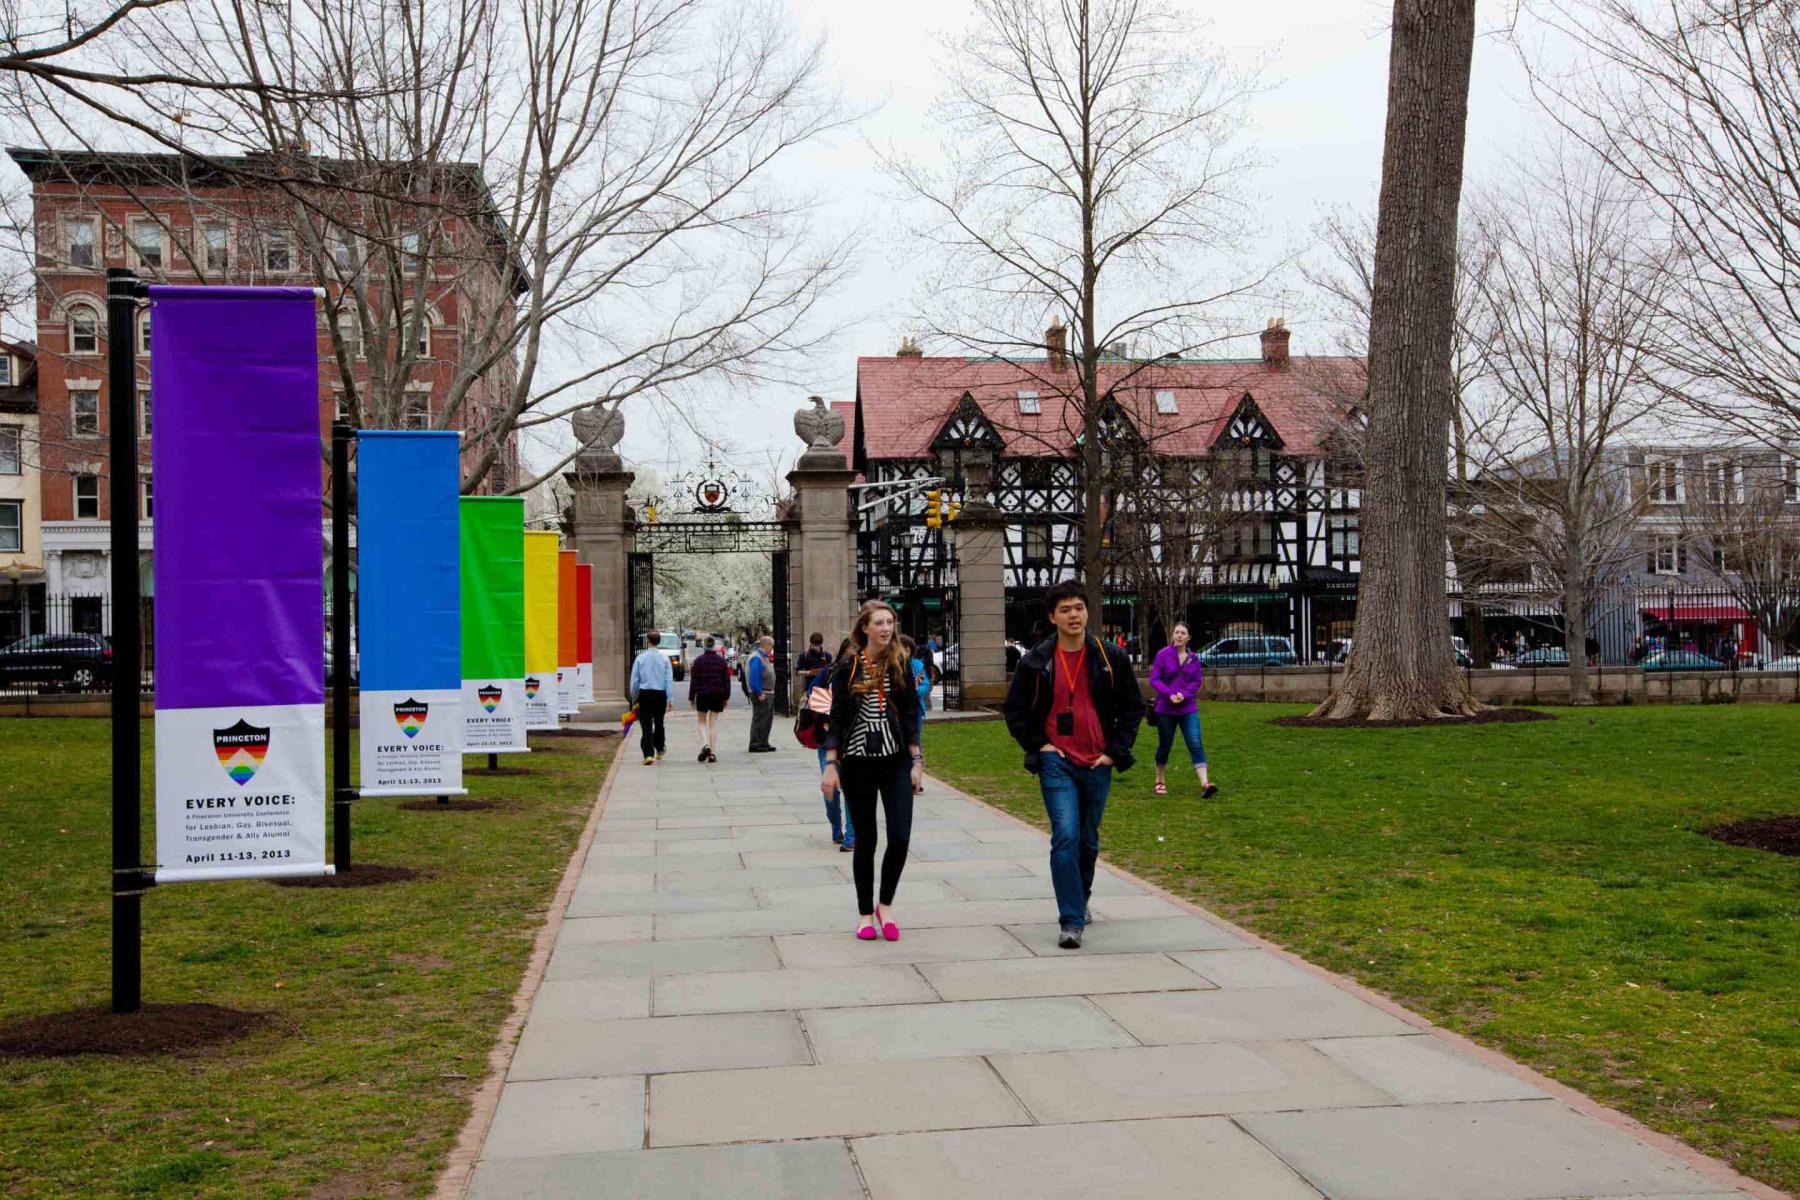 Students walking past rainbow flags